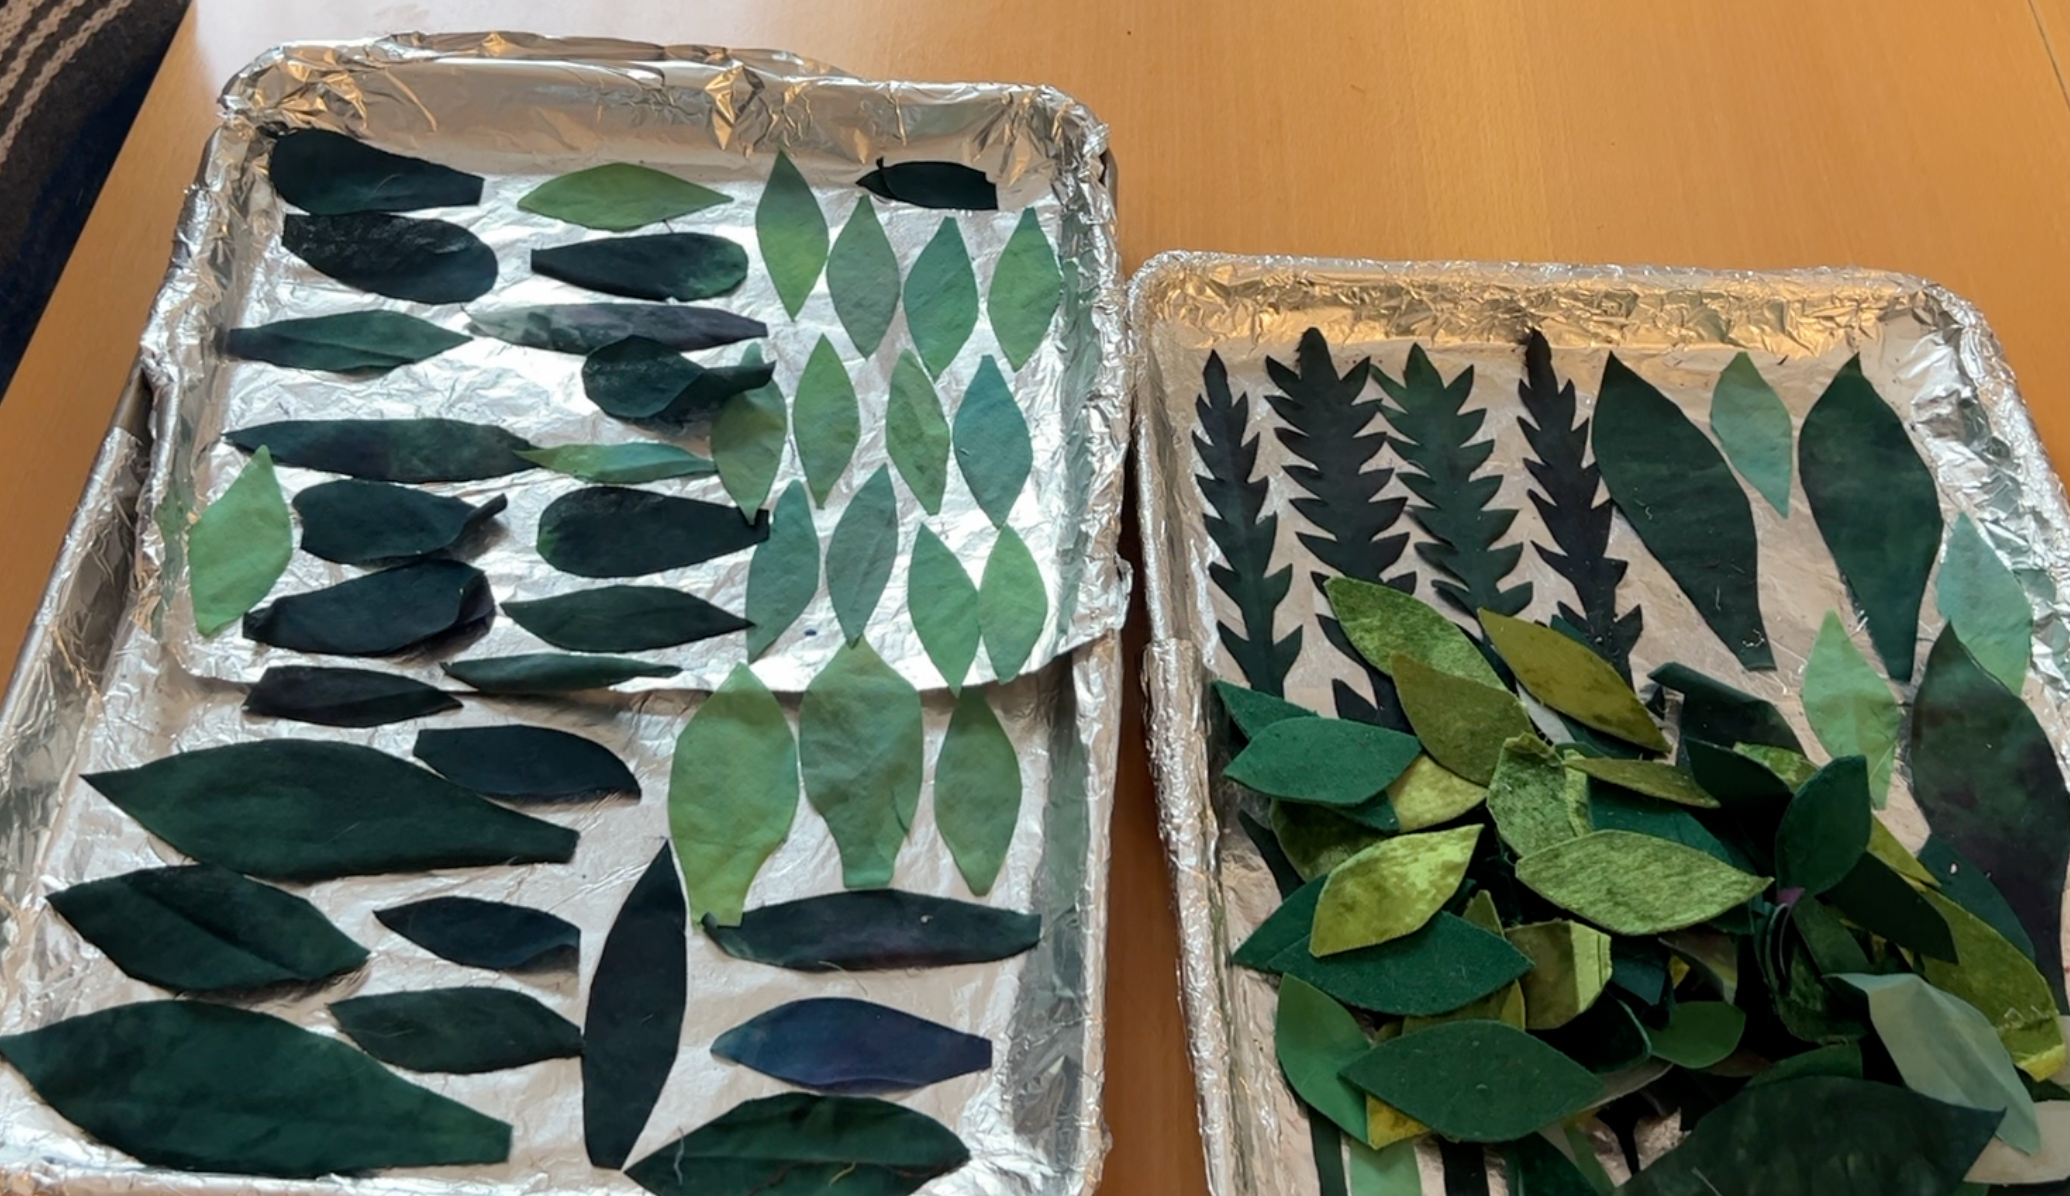 Trays of fabric leaves